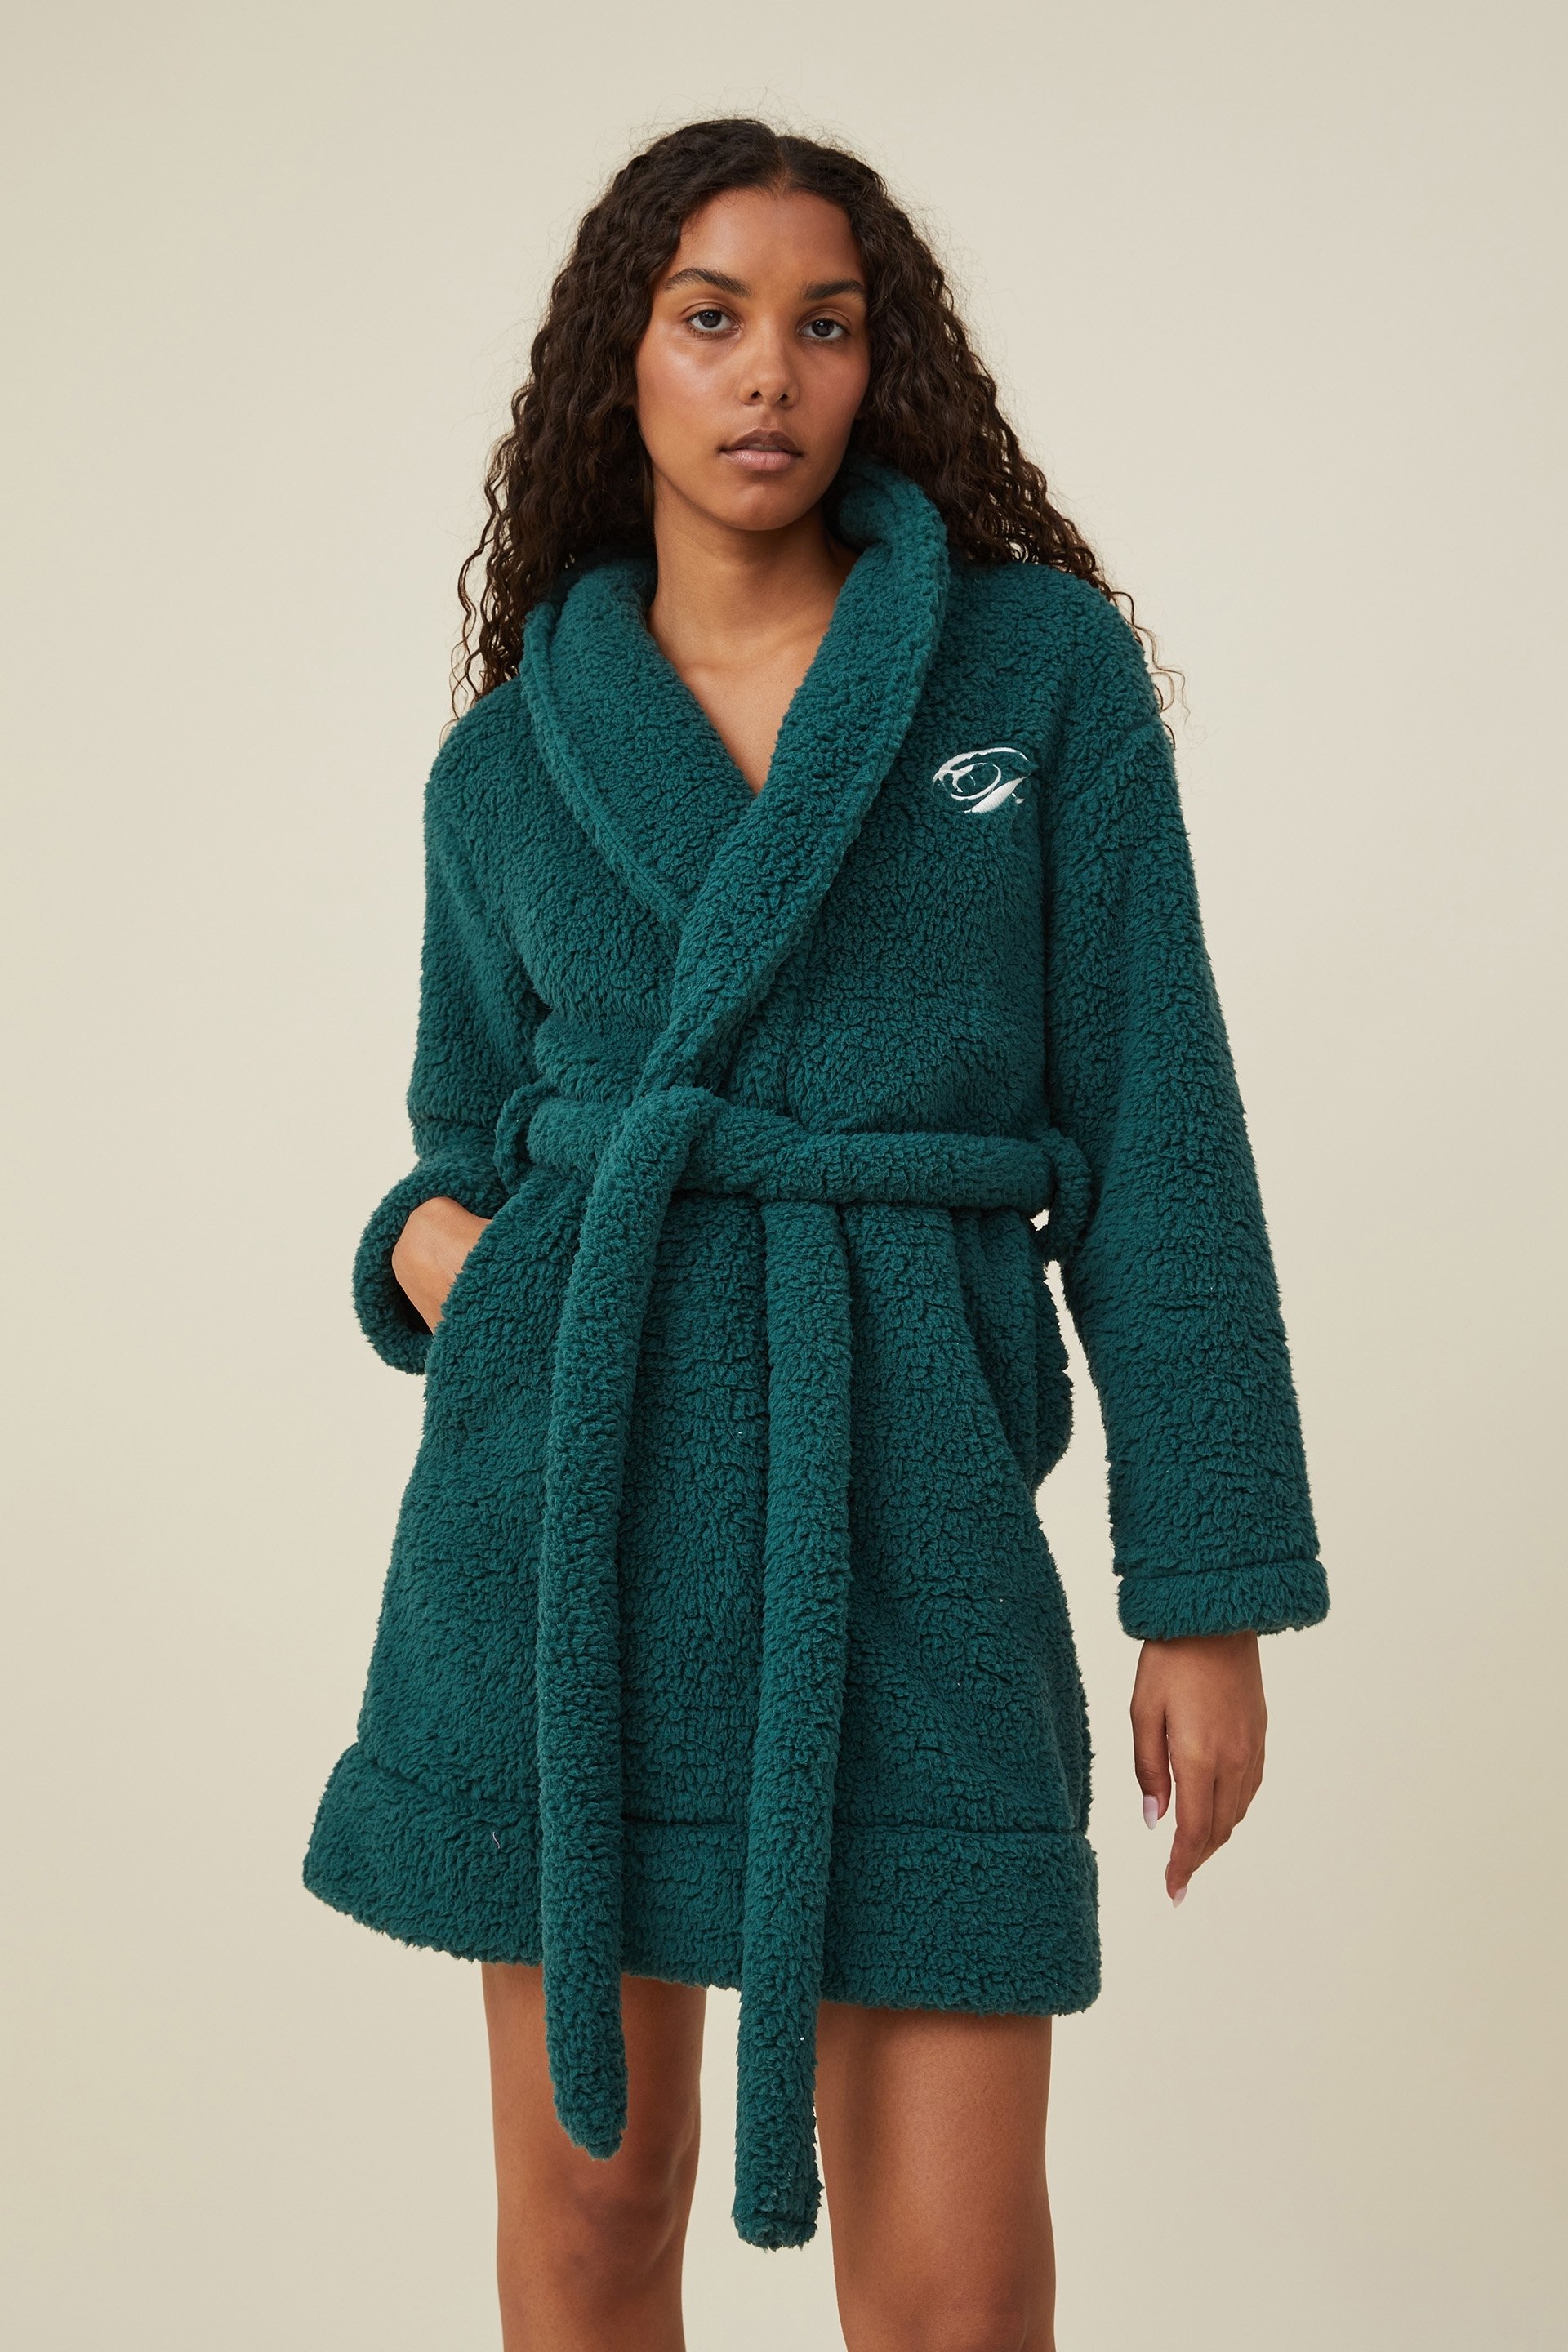 Body - Personalisation Hotel Luxe Snuggle Robe - Forrest green